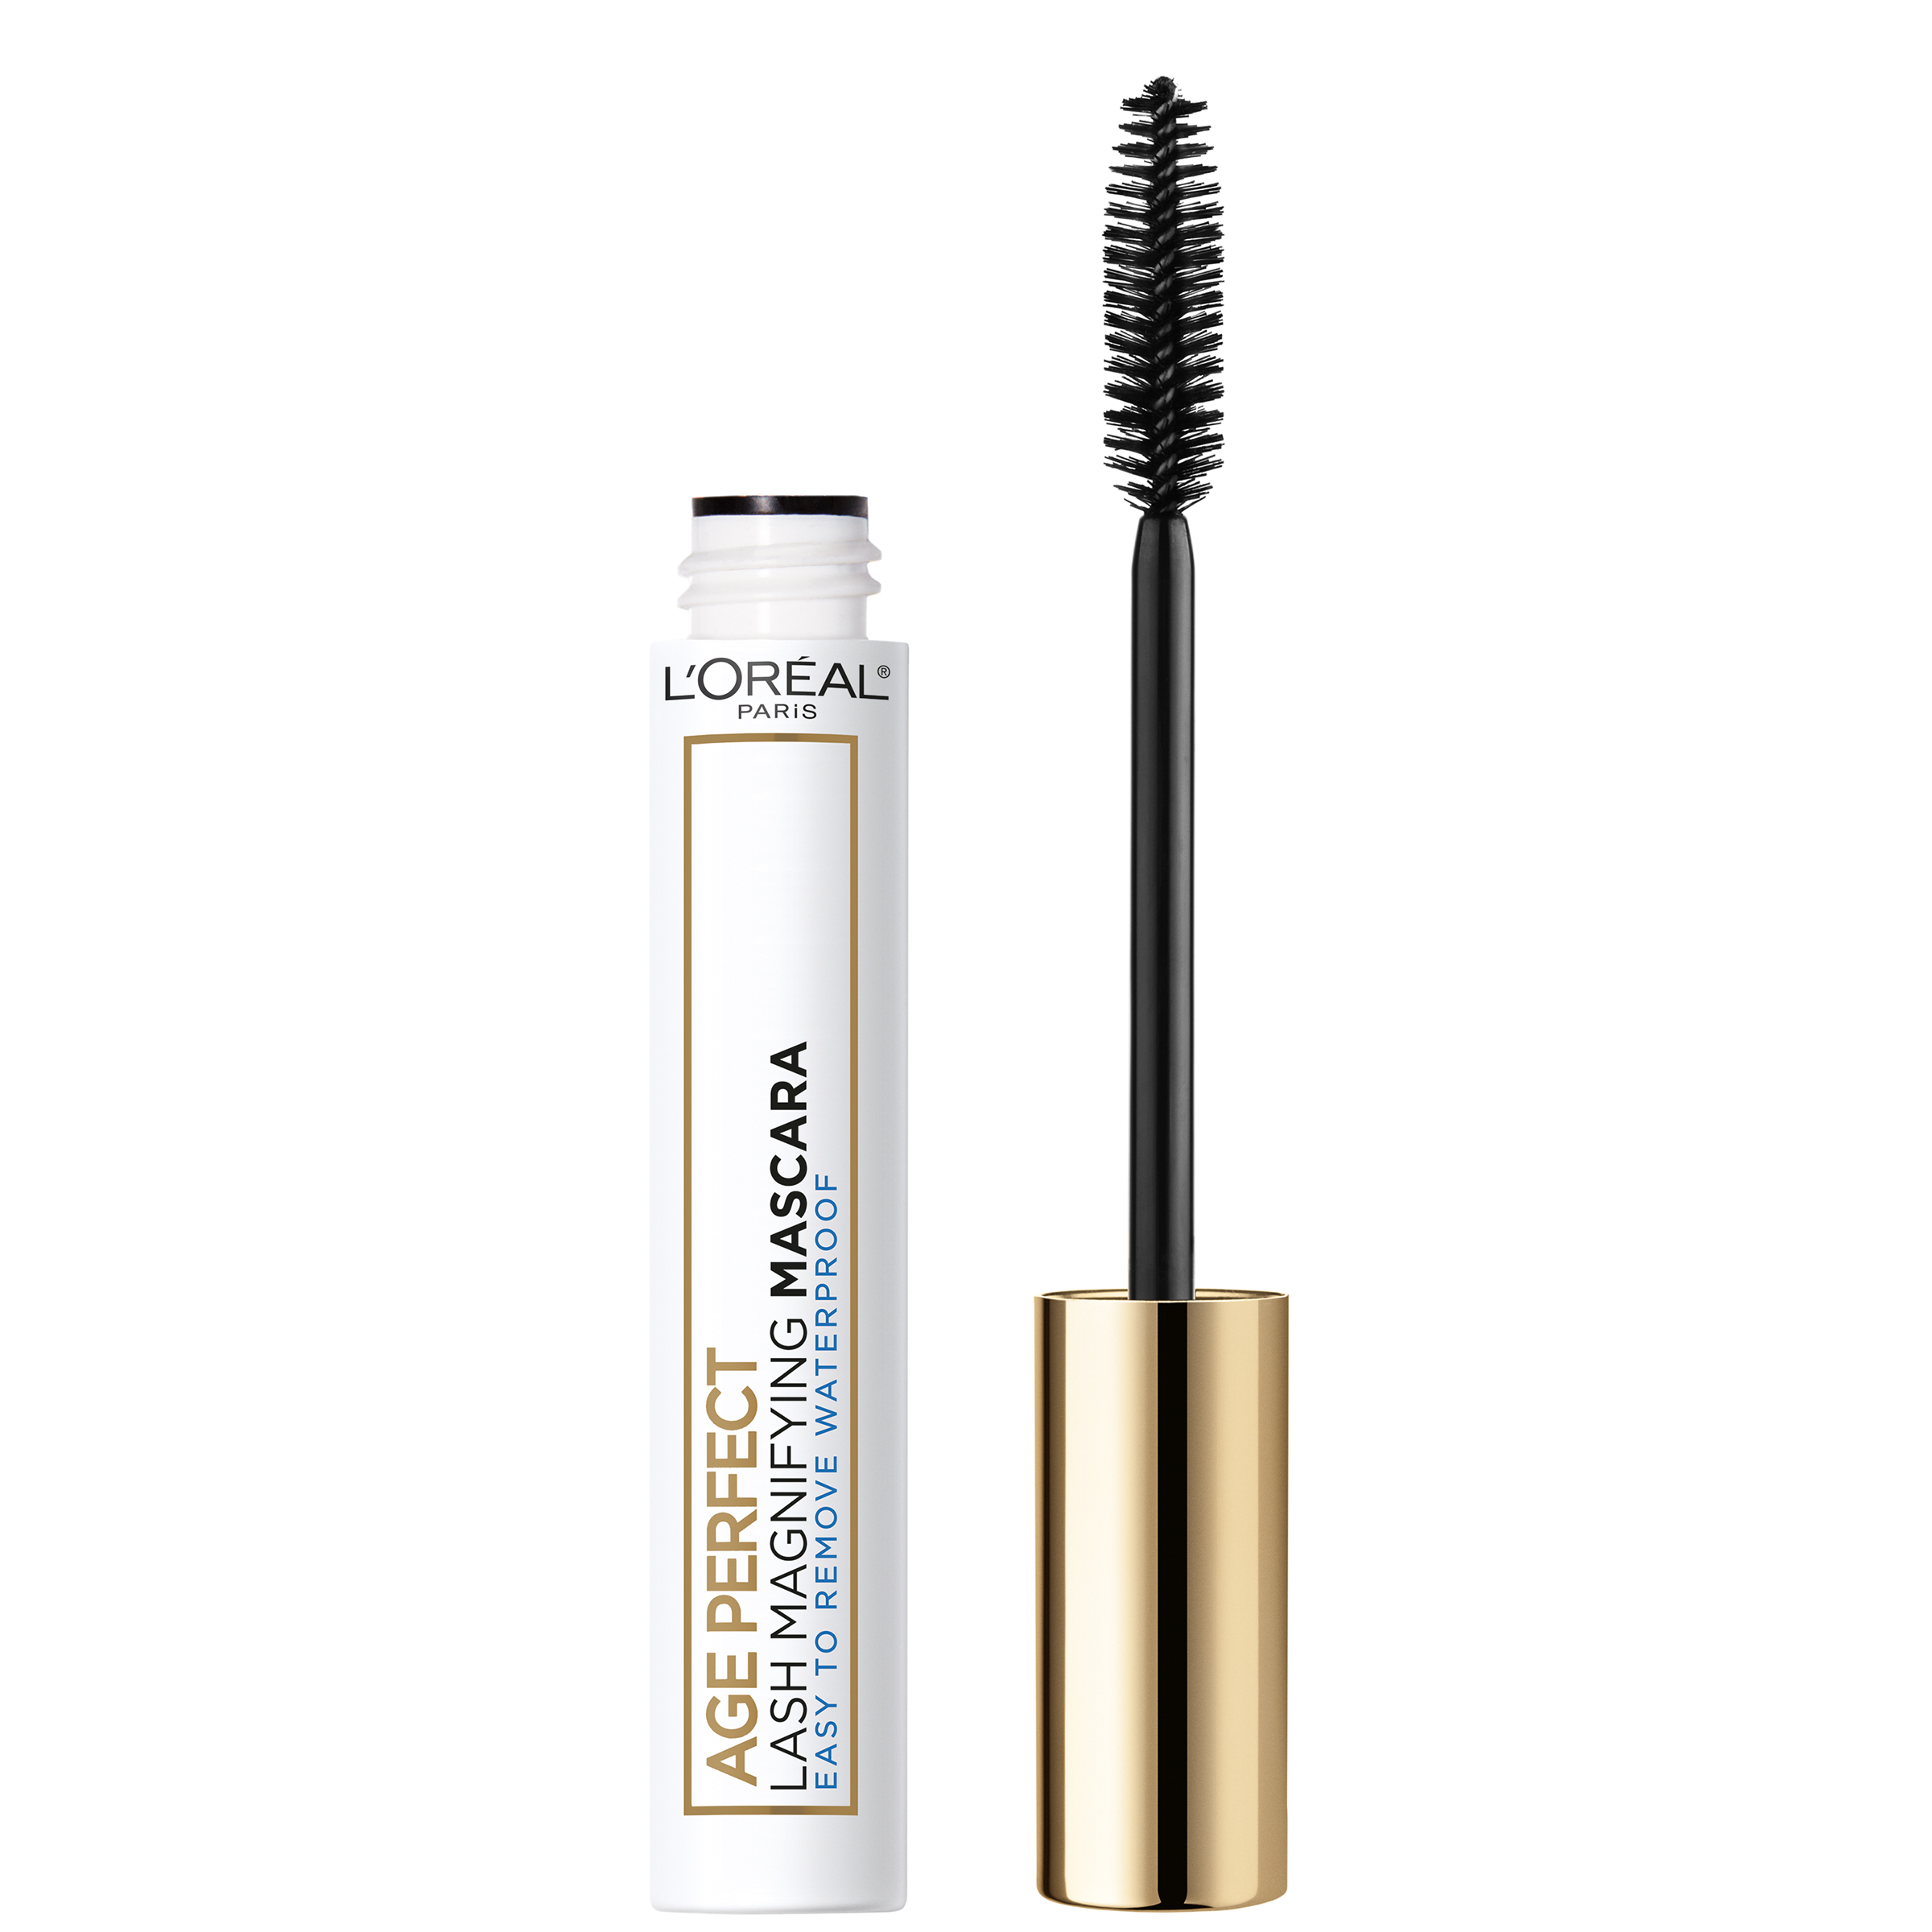 Loreal Paris Age Perfect Lash Magnifying Waterproof Mascara for best eye products for older women.